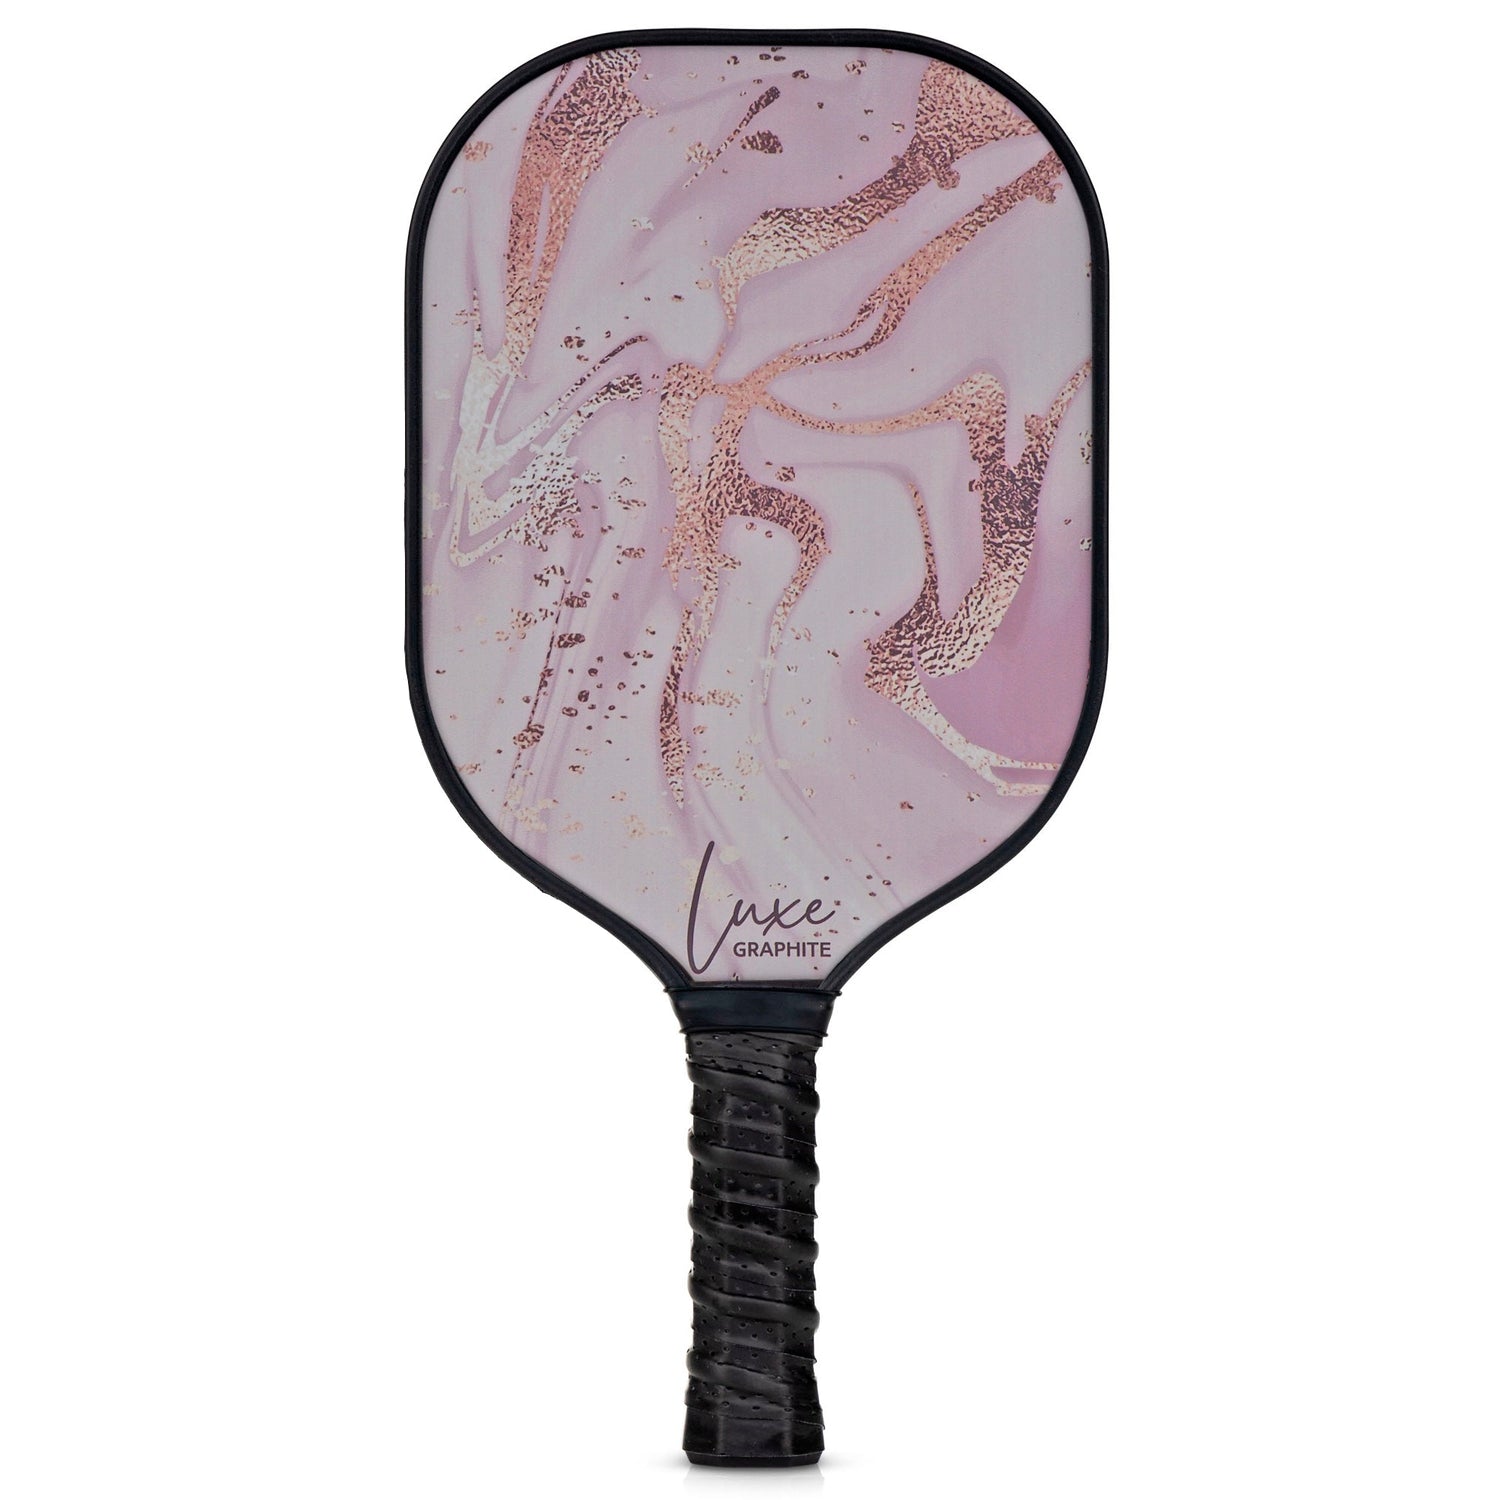 Golden Pink with Black Luxe Graphite Pickleball Paddle with Cover - Palms-O-Aces